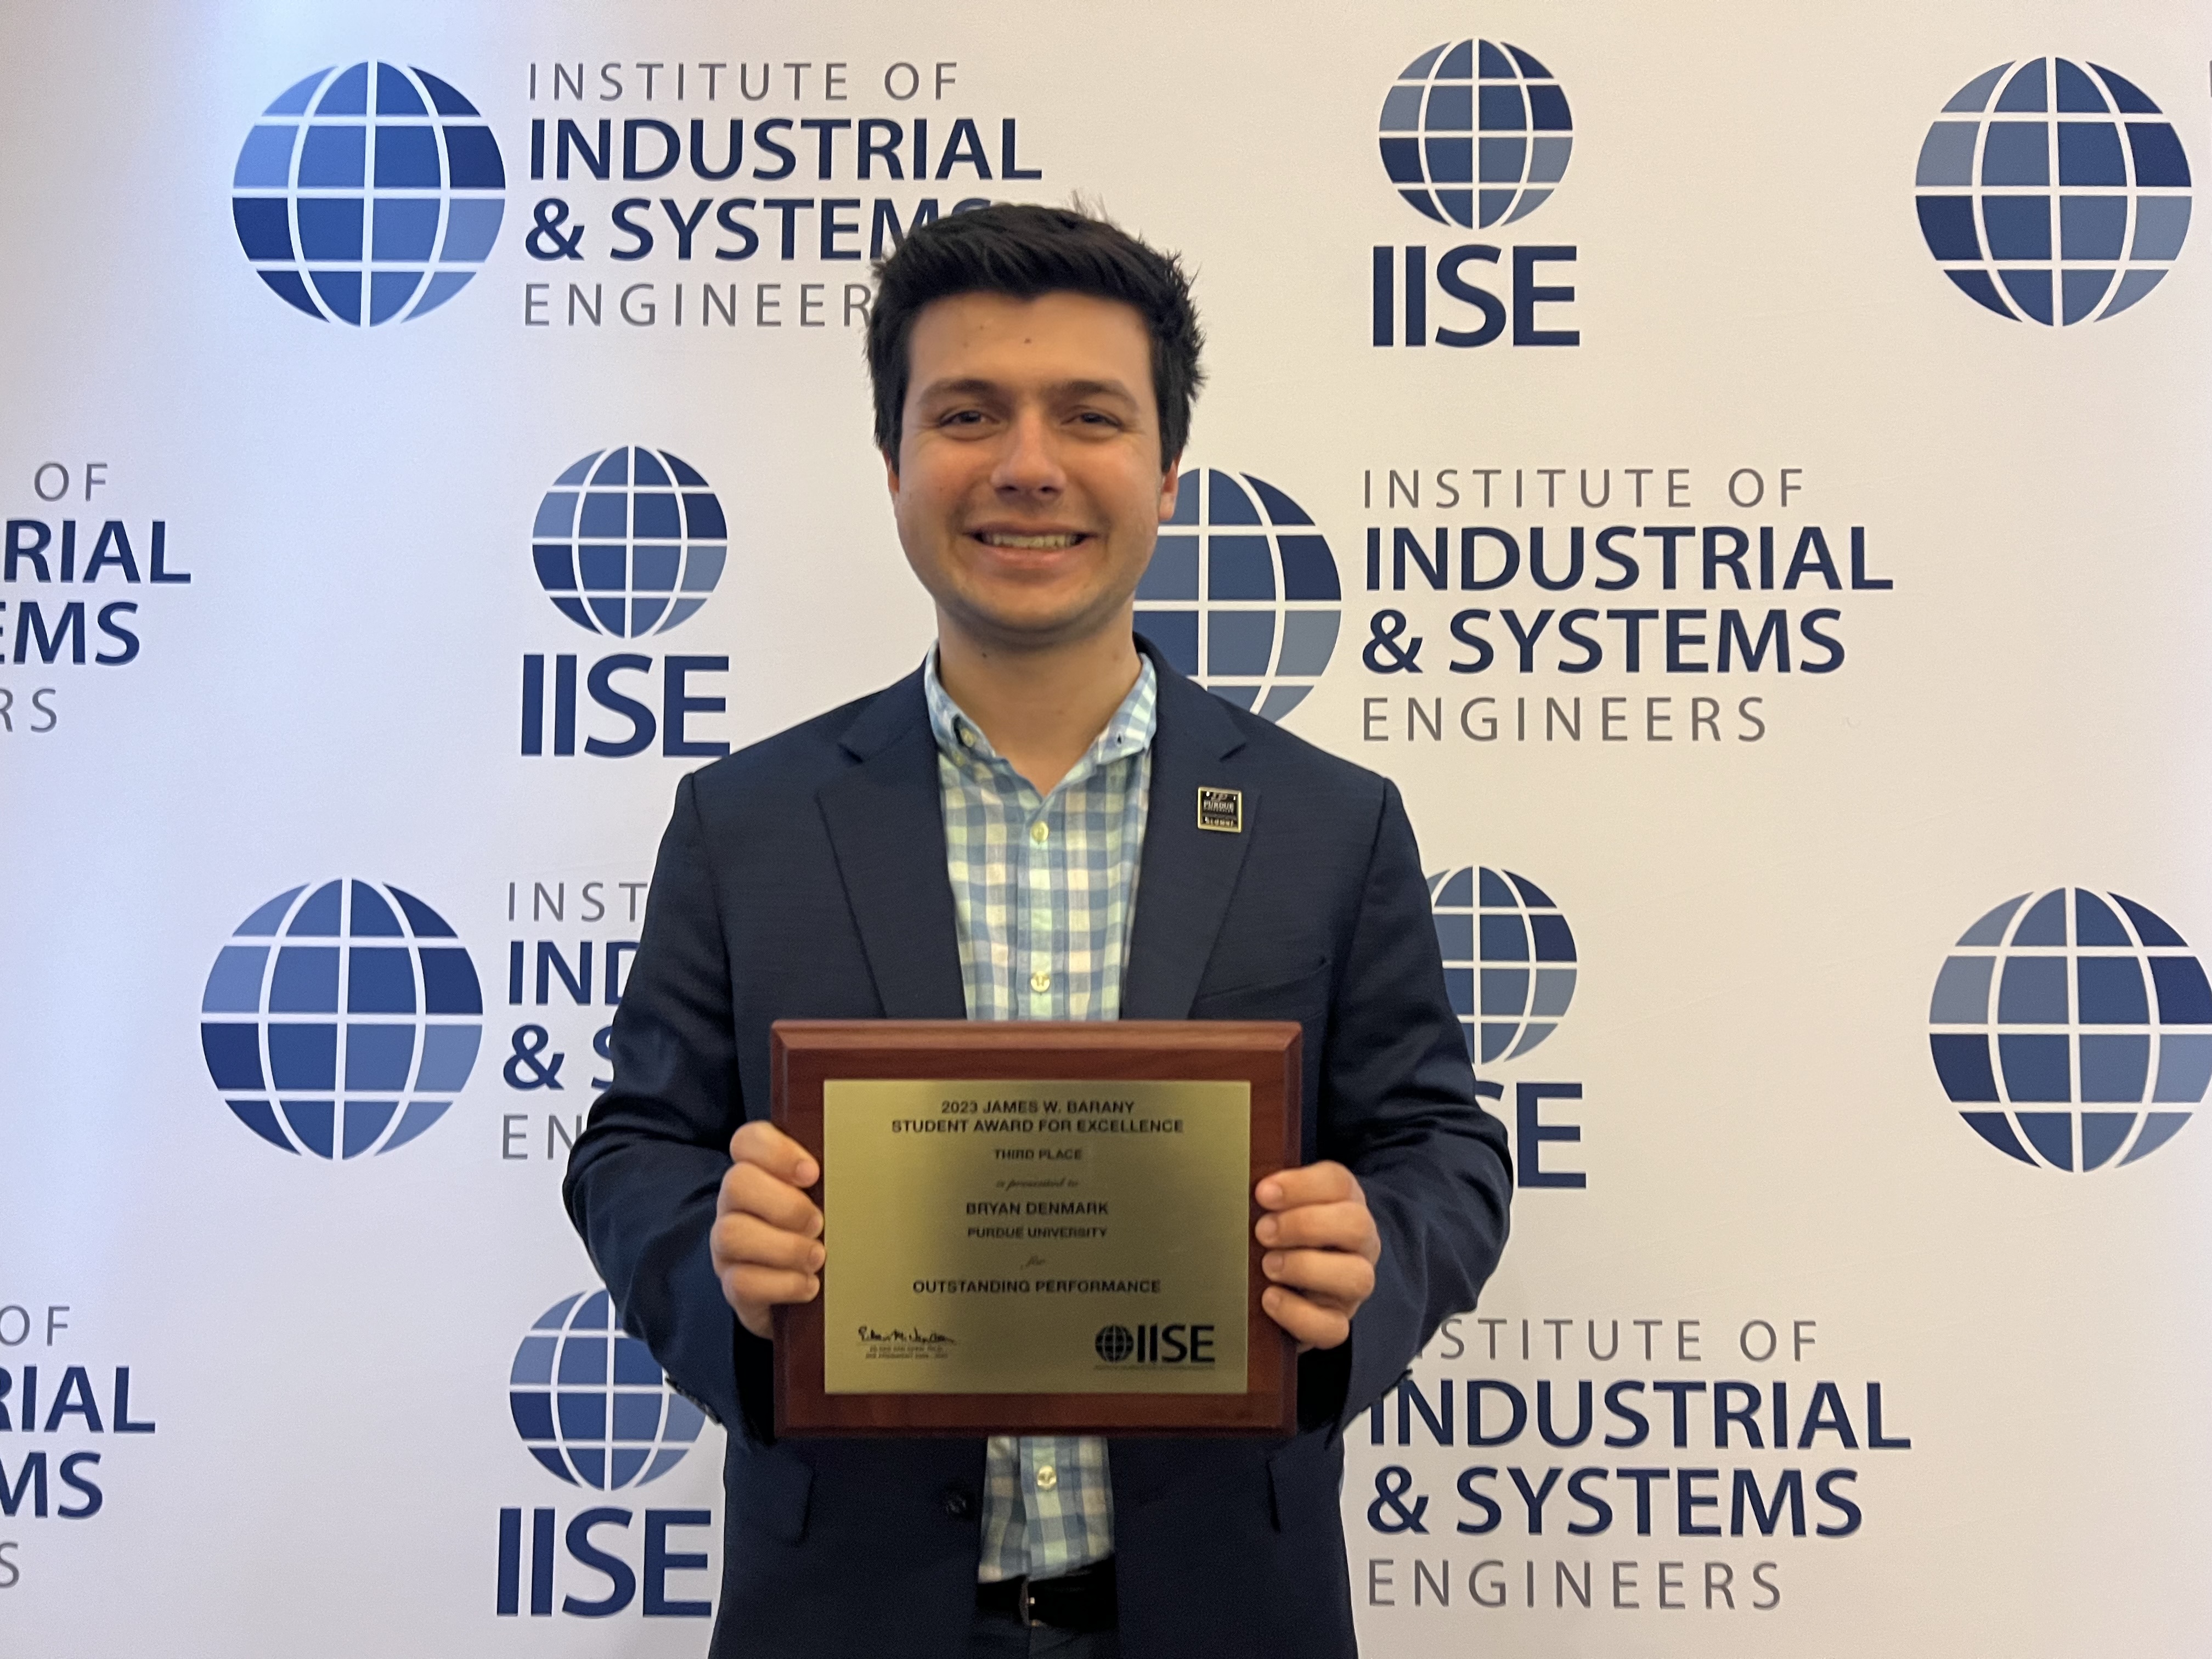 Bryan Denmark with his IISE James W. Barany Student Award for Excellence